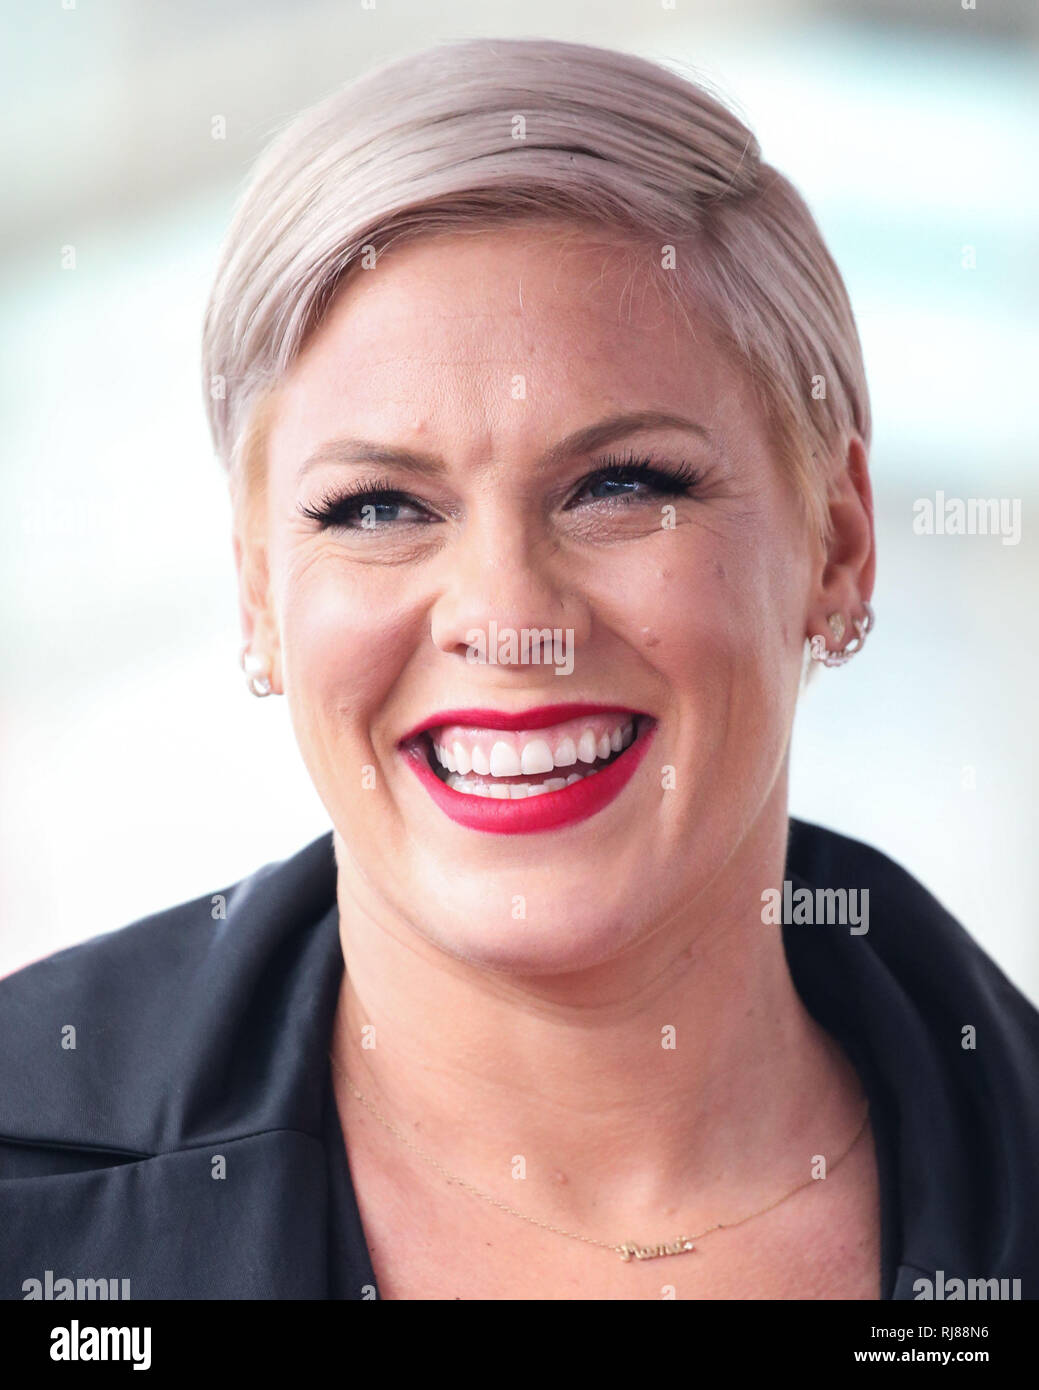 HOLLYWOOD, LOS ANGELES, CA, USA - FEBRUARY 05: Singer P!nk (Pink